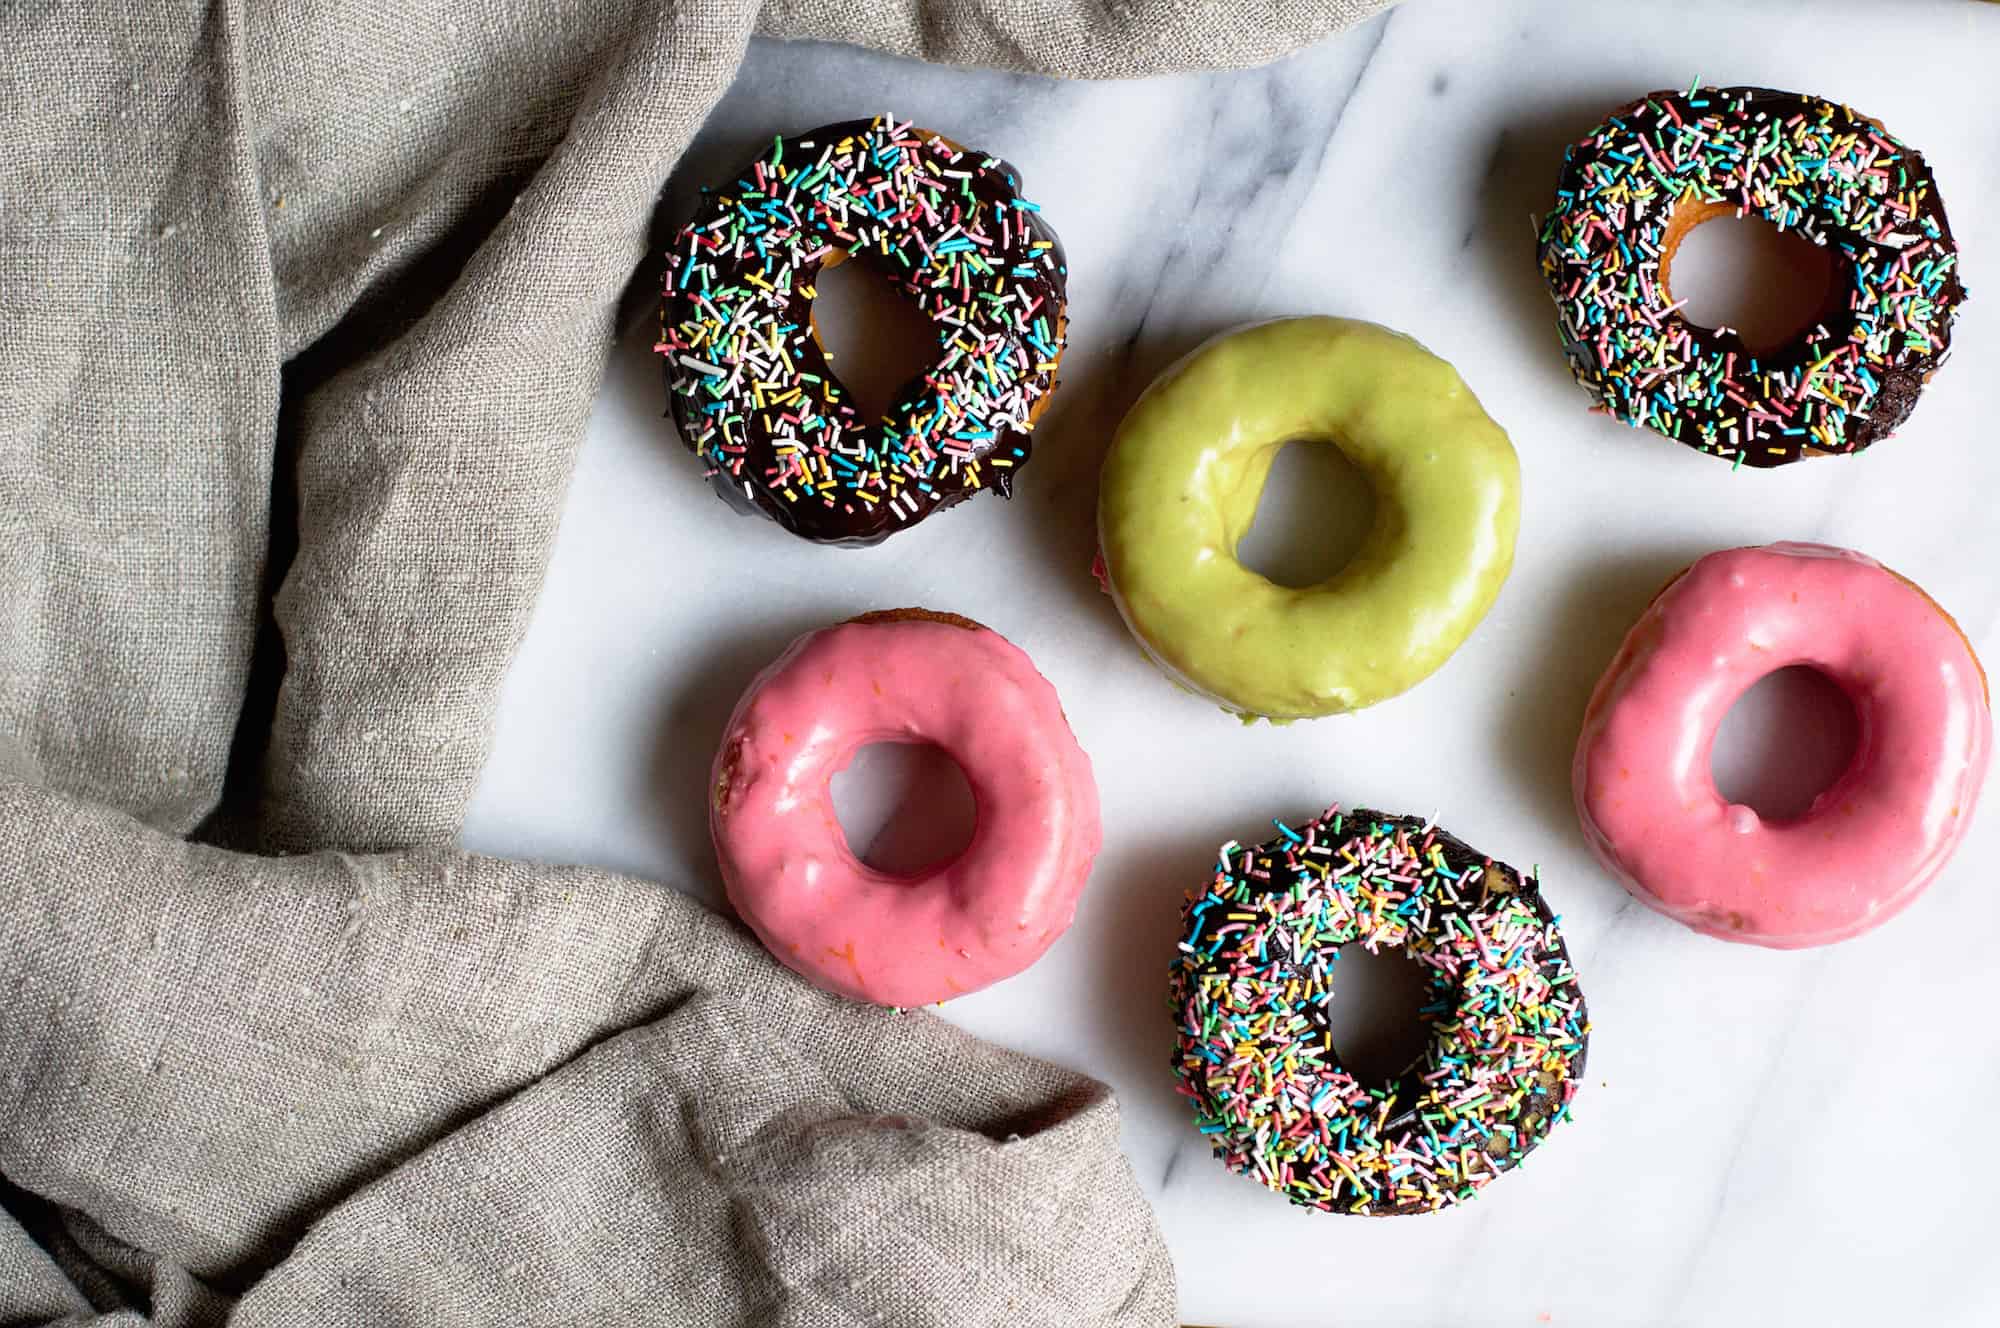 From Brooklyn to Paris: A Baker’s Tale of Transition and Doughnuts